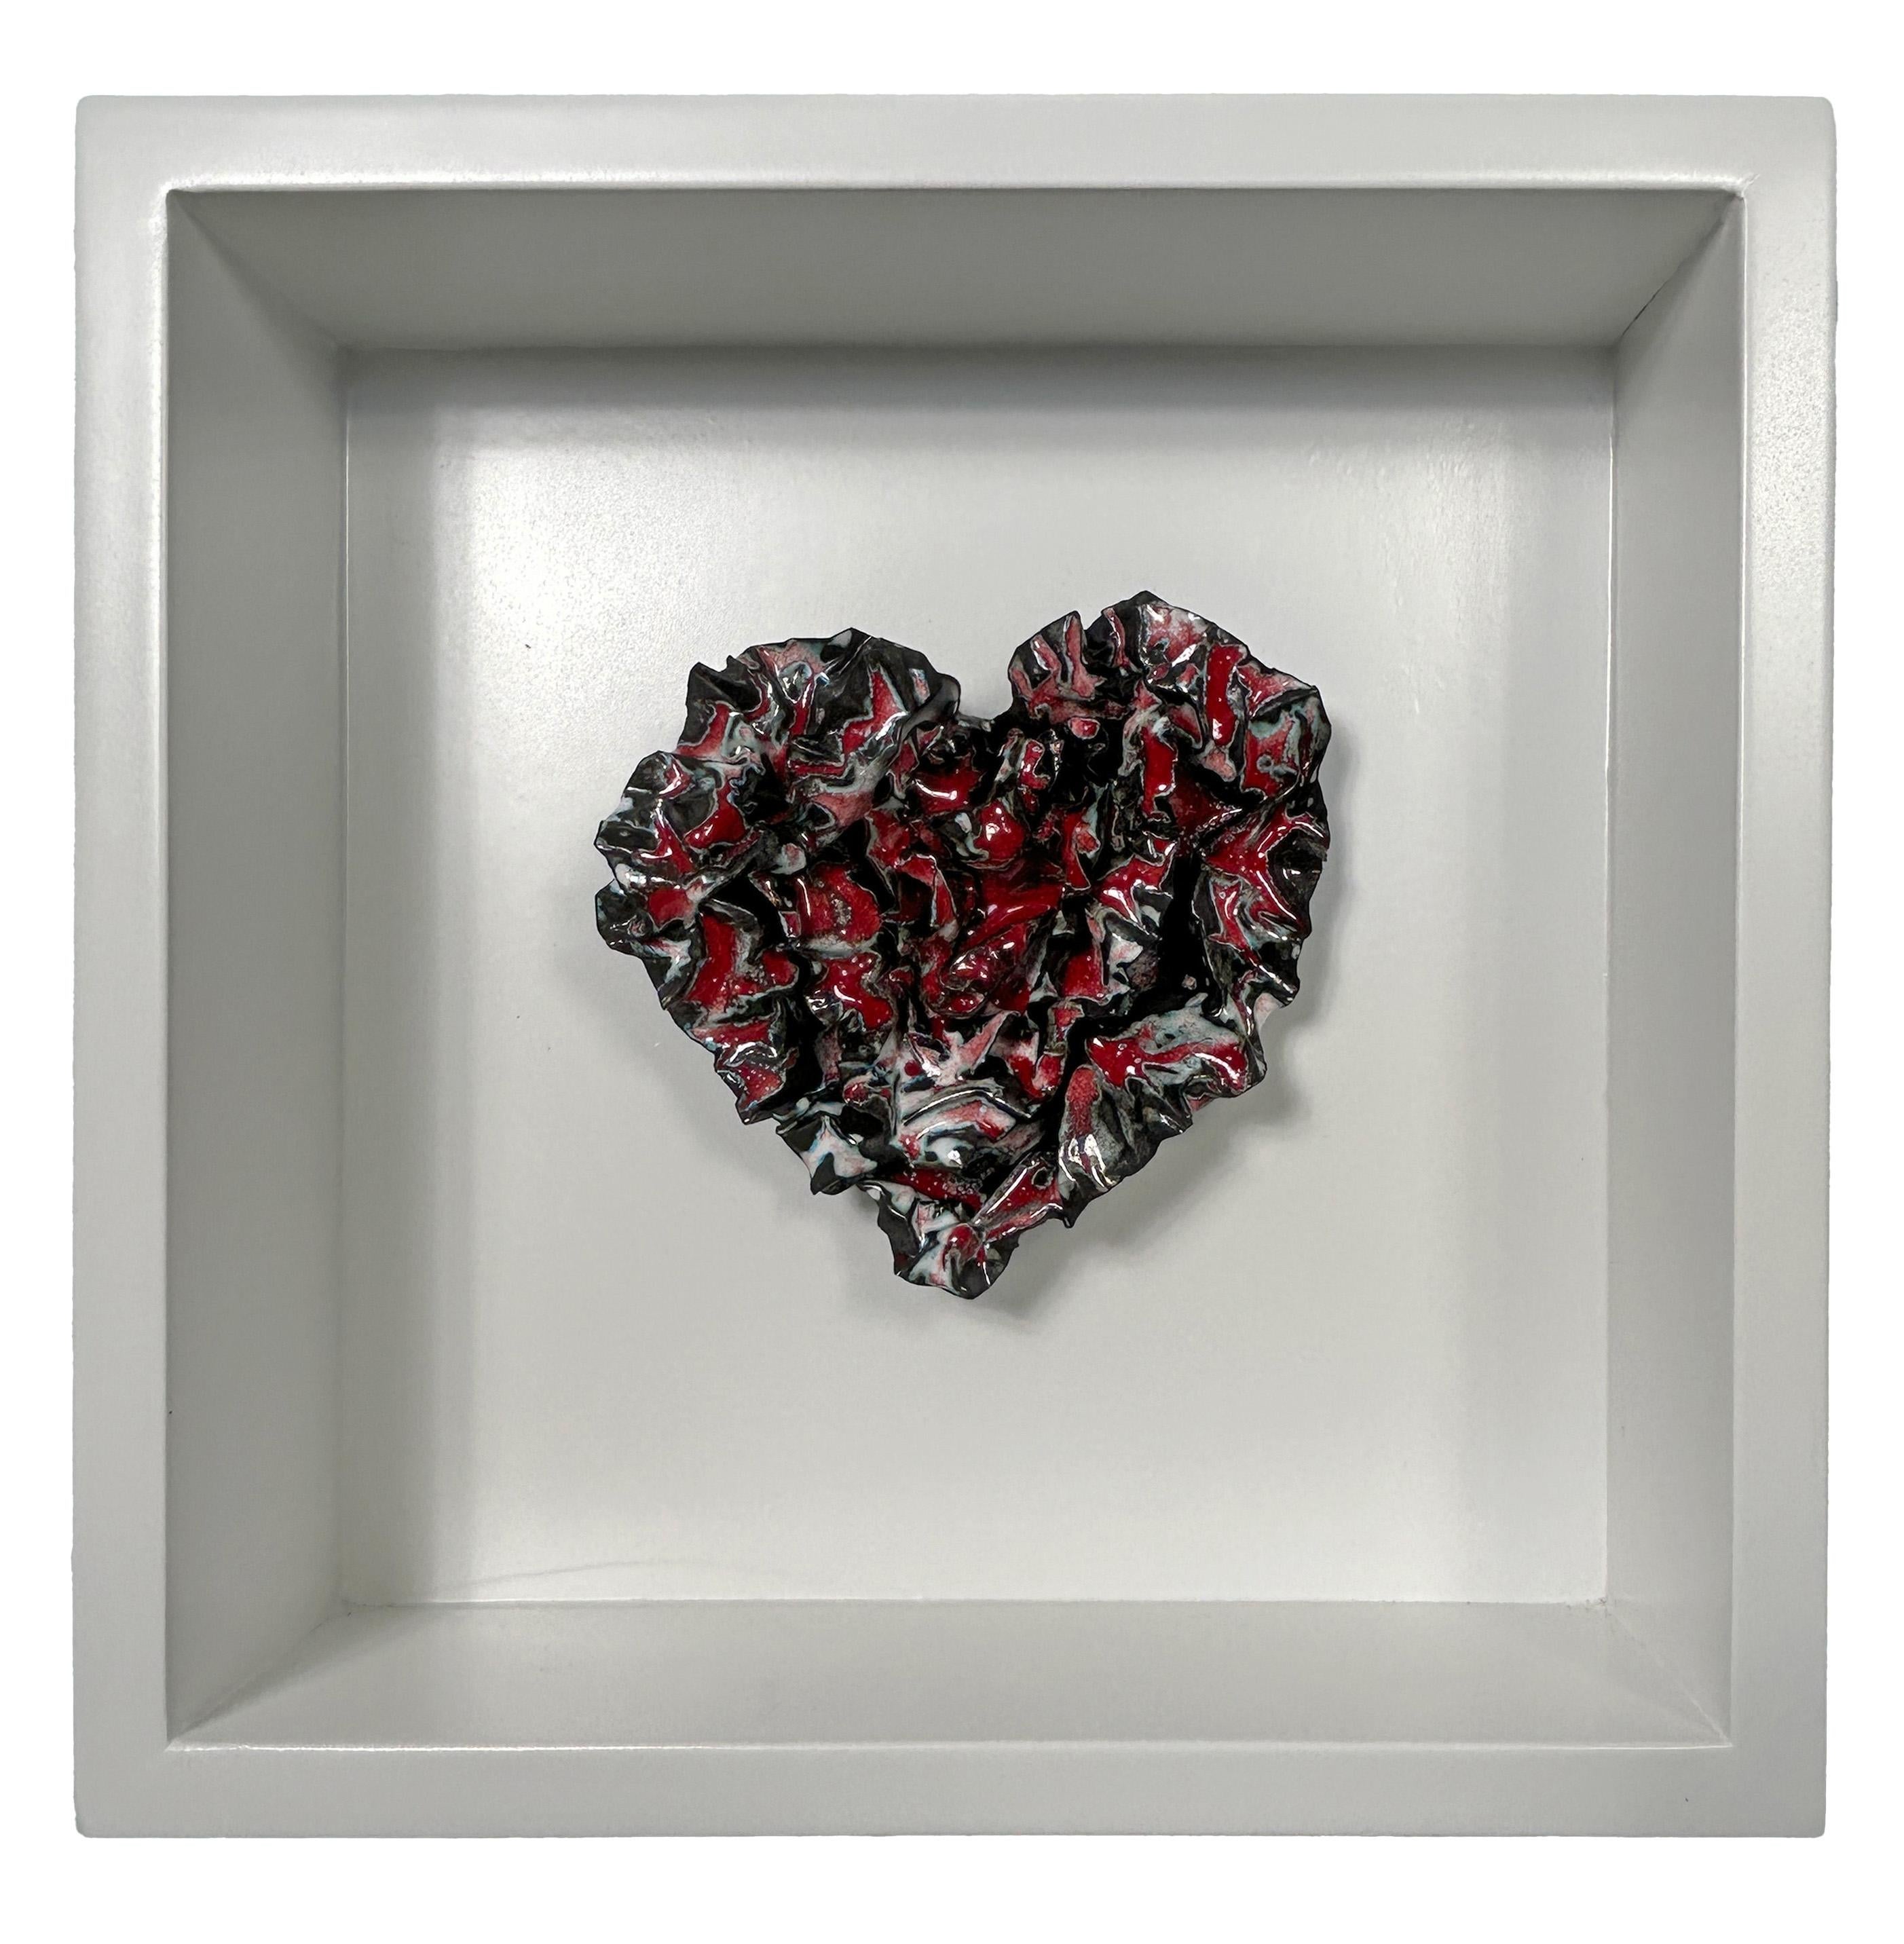 Sherry Been Abstract Sculpture - "Ribbons of Red" Heart Abstract Wall Art Sculpture, 2023